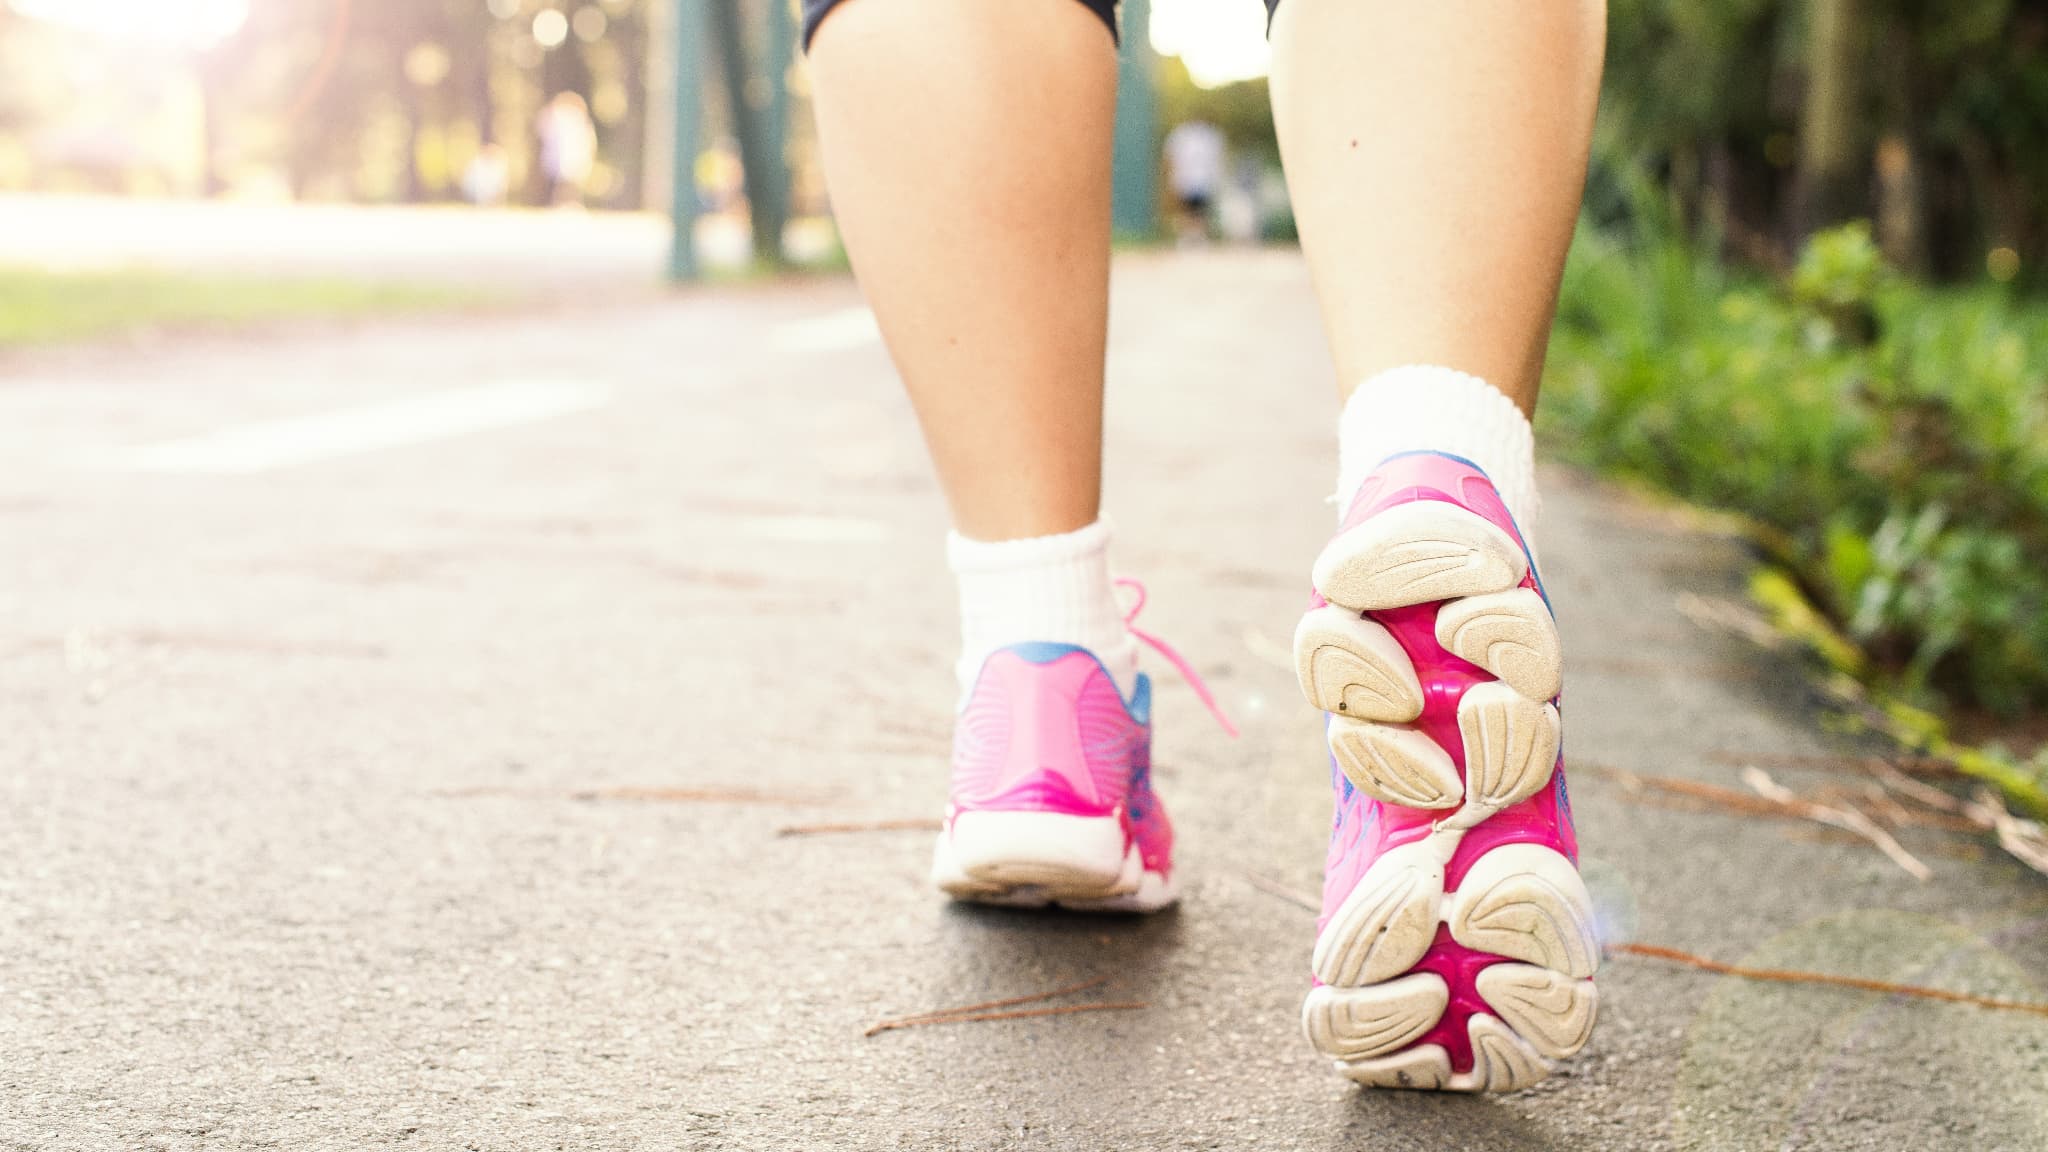 Do you really have to walk 10,000 steps a day to be healthy?